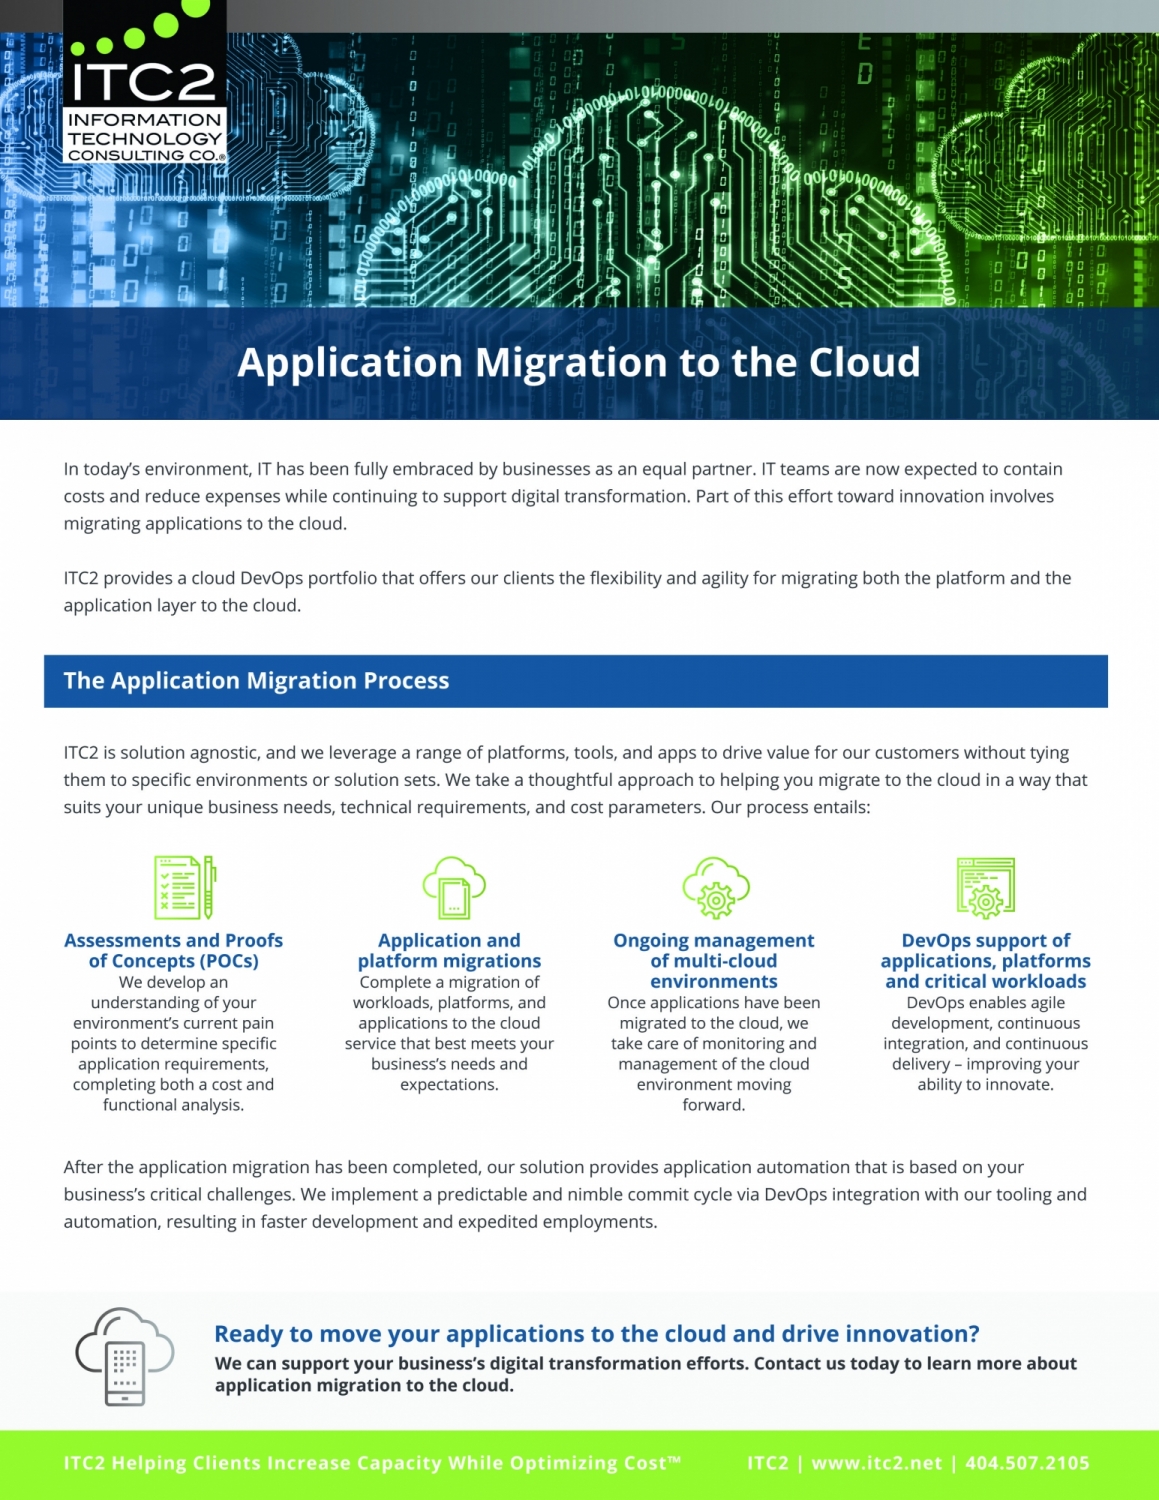 Application Migration to the Cloud whitepaper